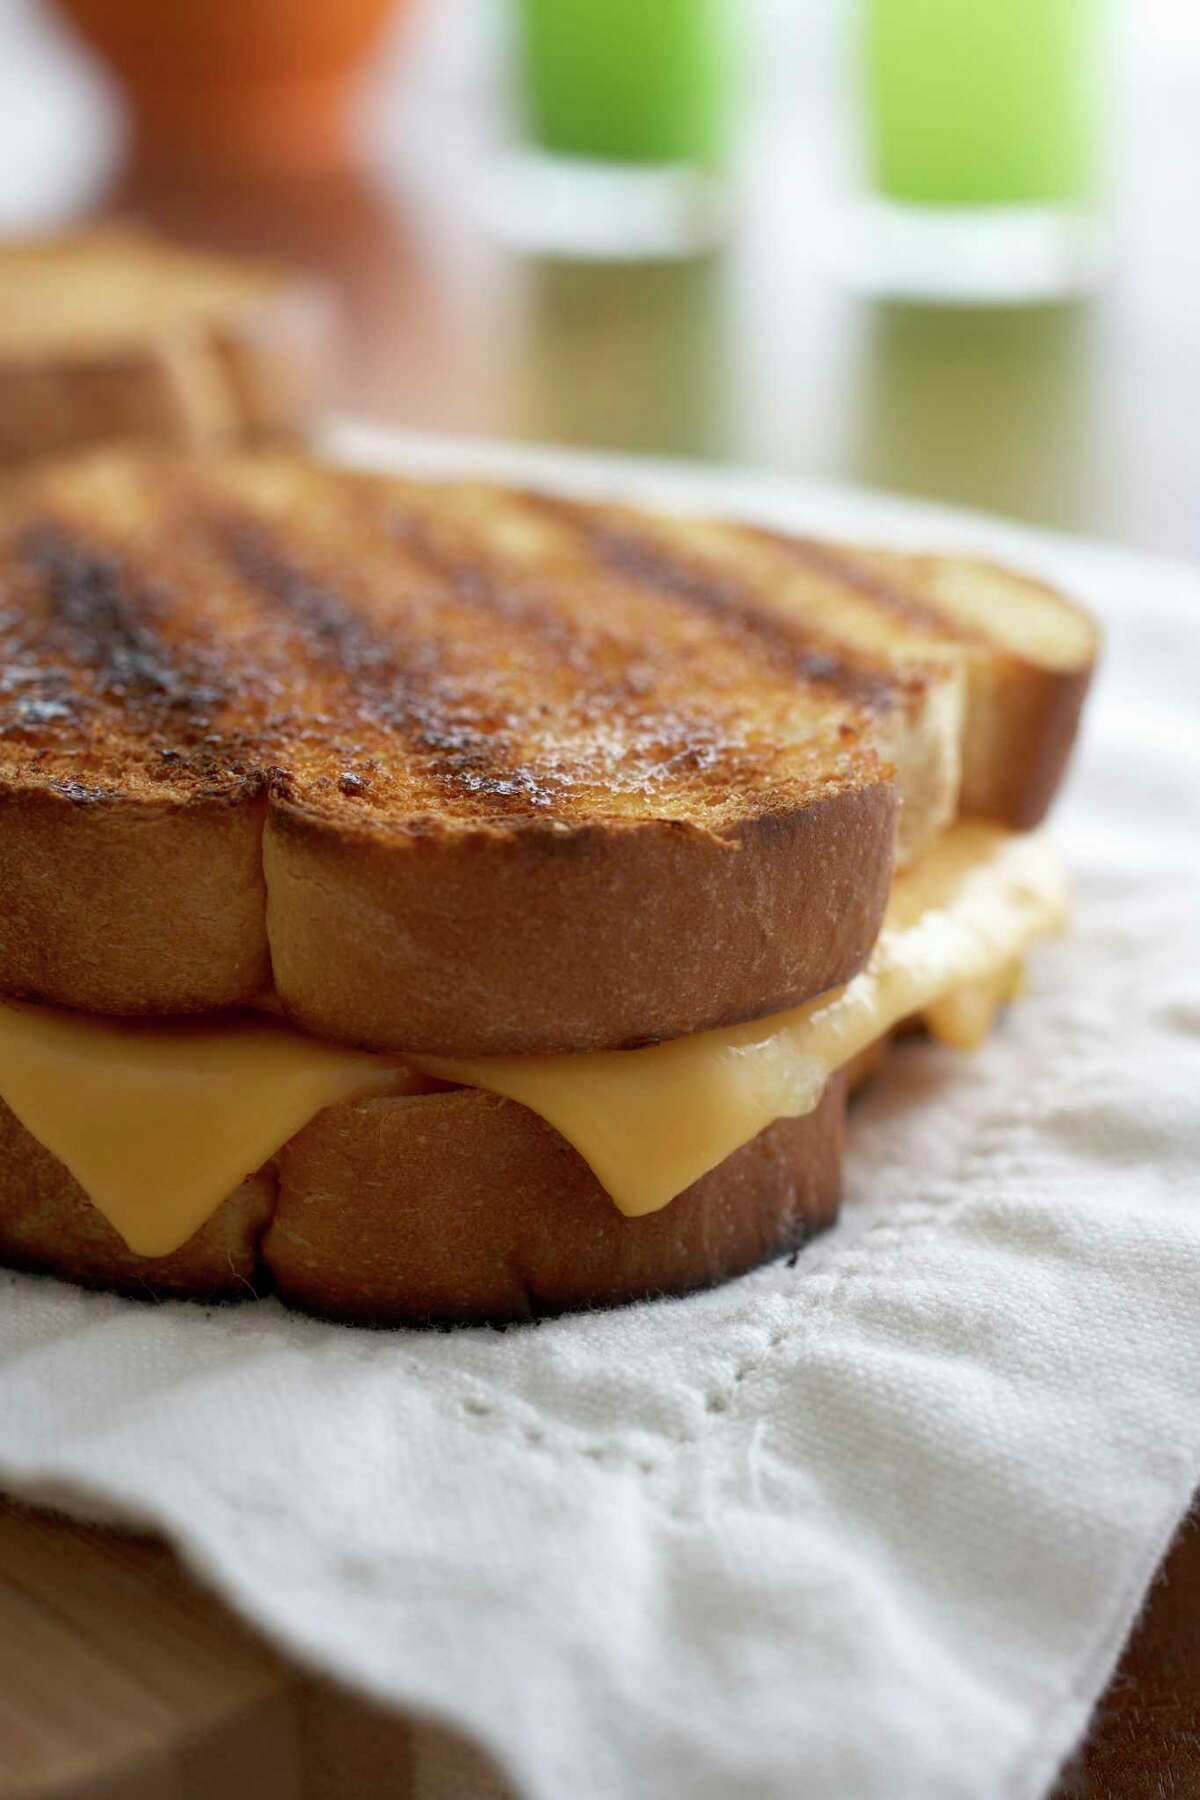 The Grilled Cheese and Craft Beer Extravaganza is planned to take place at the Busted Sandal Brewing Company, at 7114 Oaklawn Drive, on July 26 from 5 to 10 p.m.